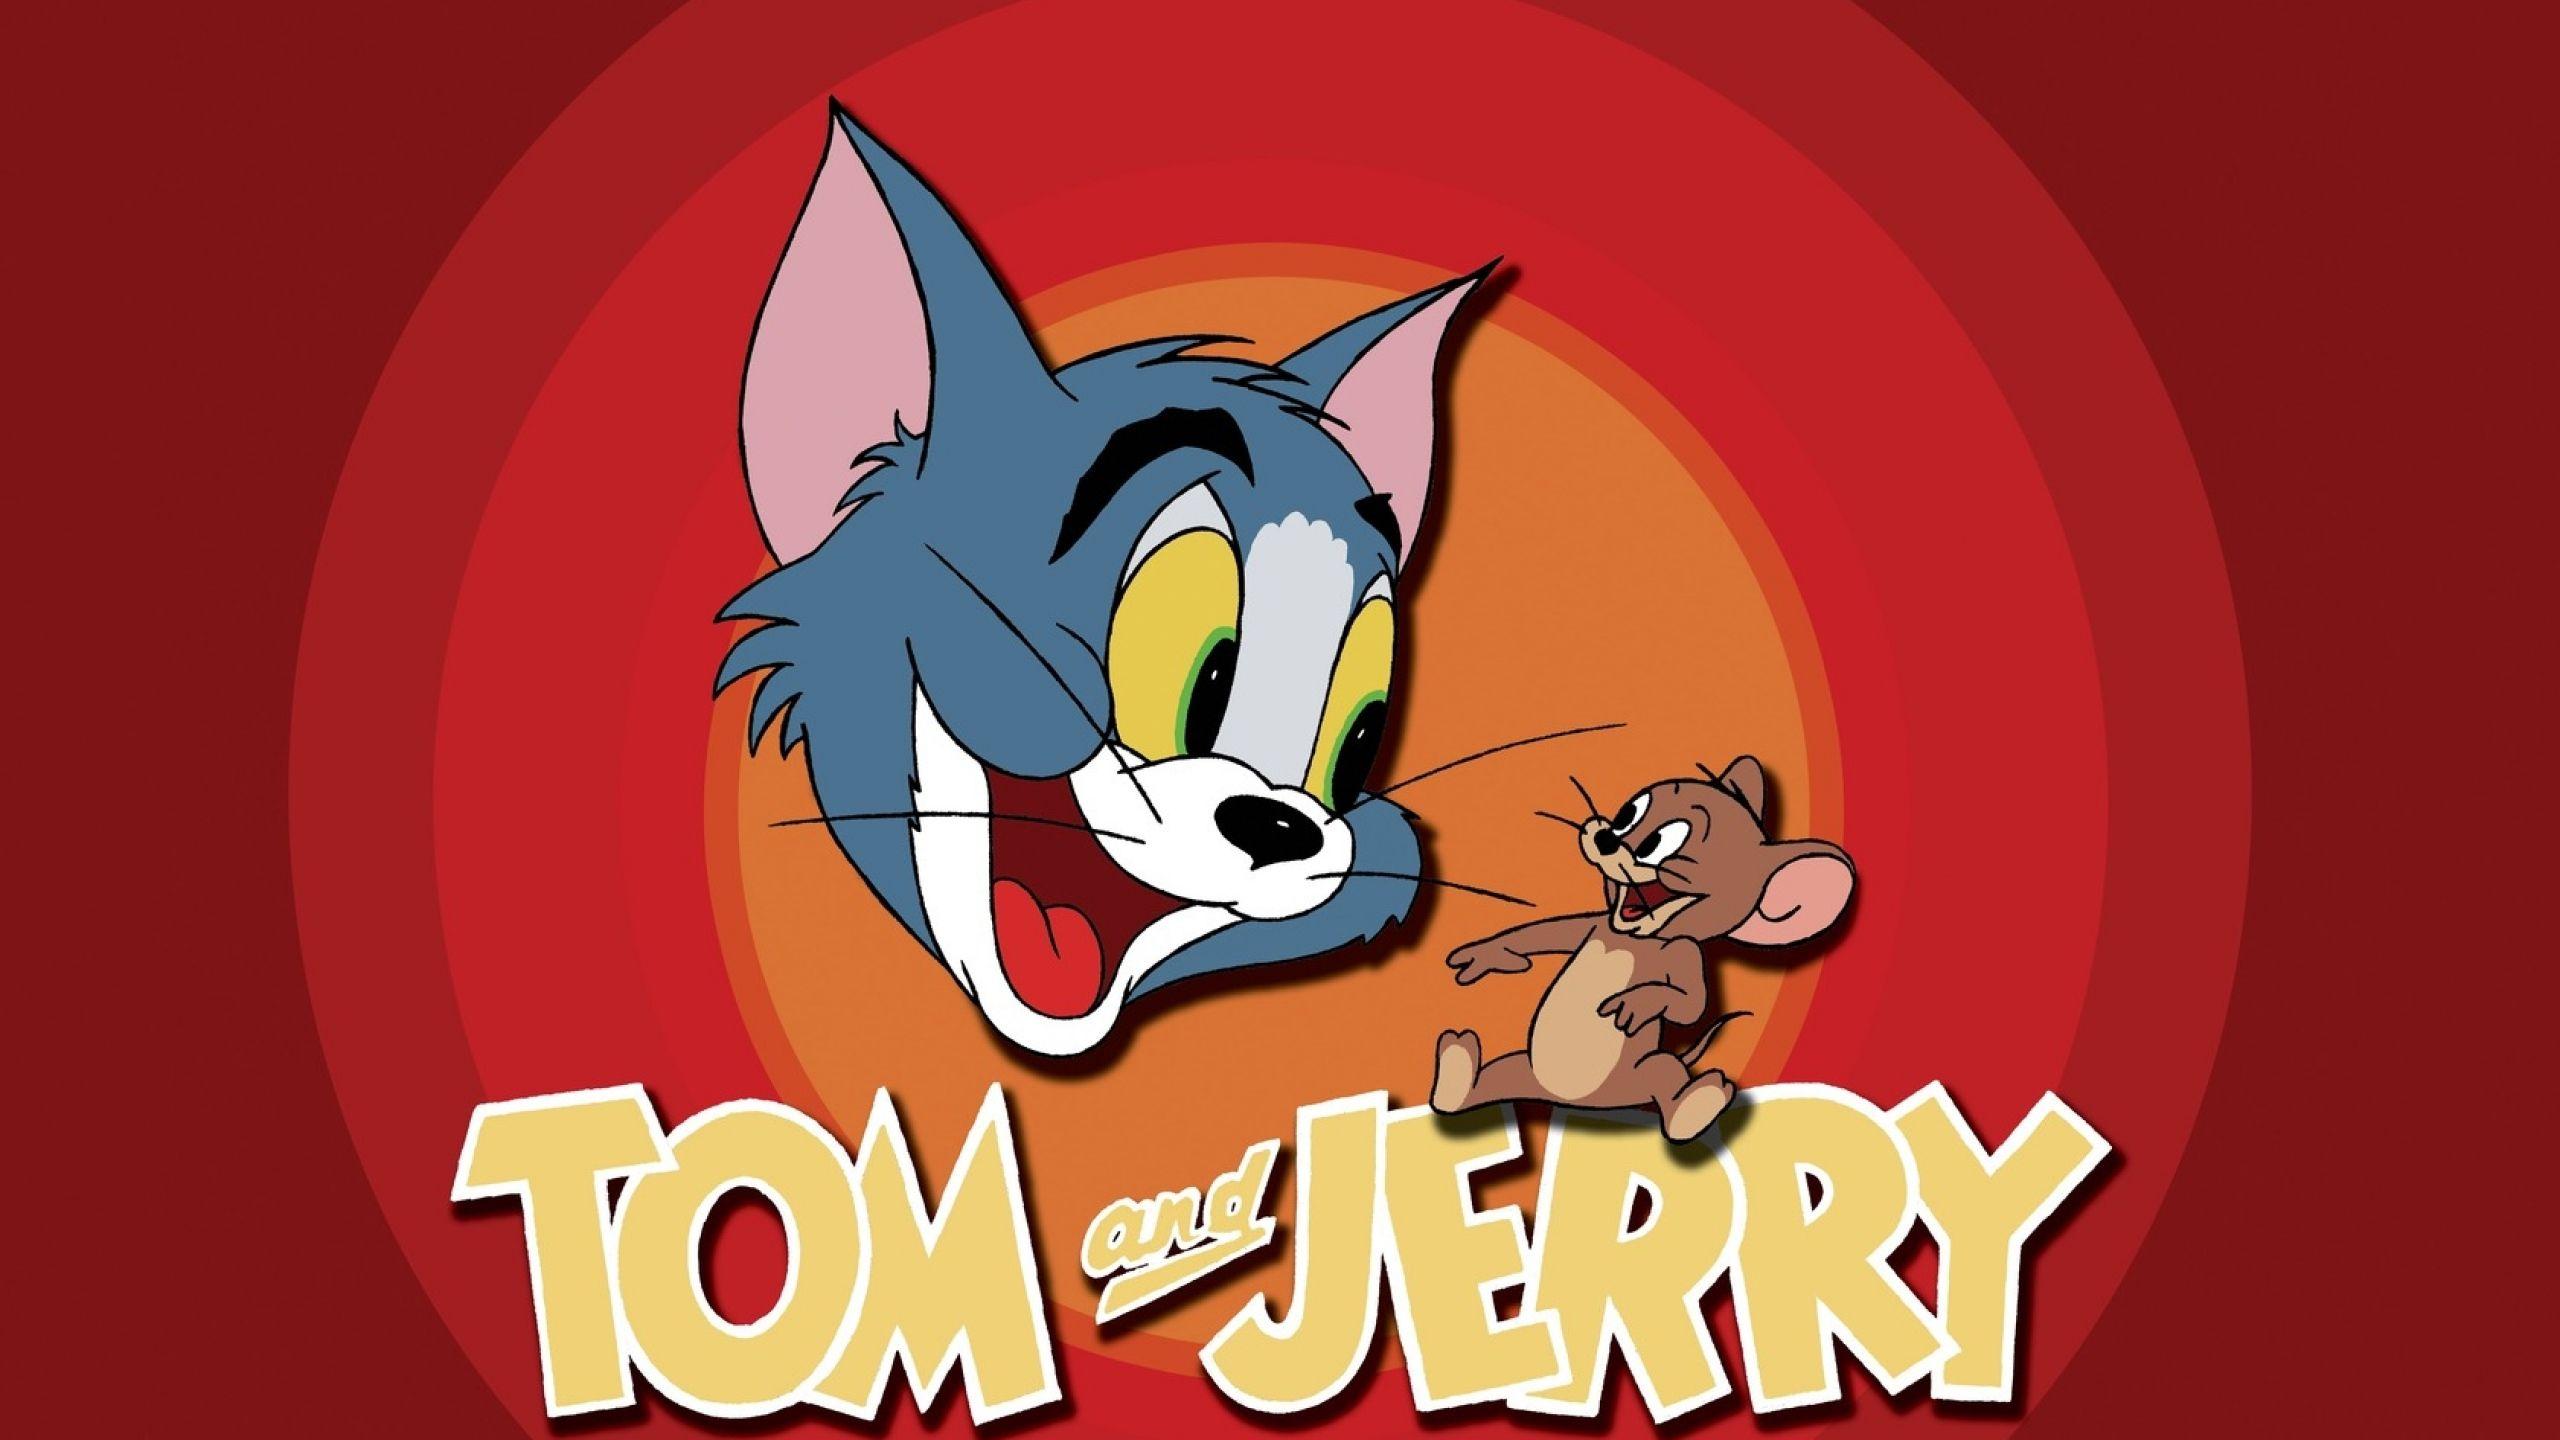 125 Tom Jerry Toy Images Stock Photos  Vectors  Shutterstock